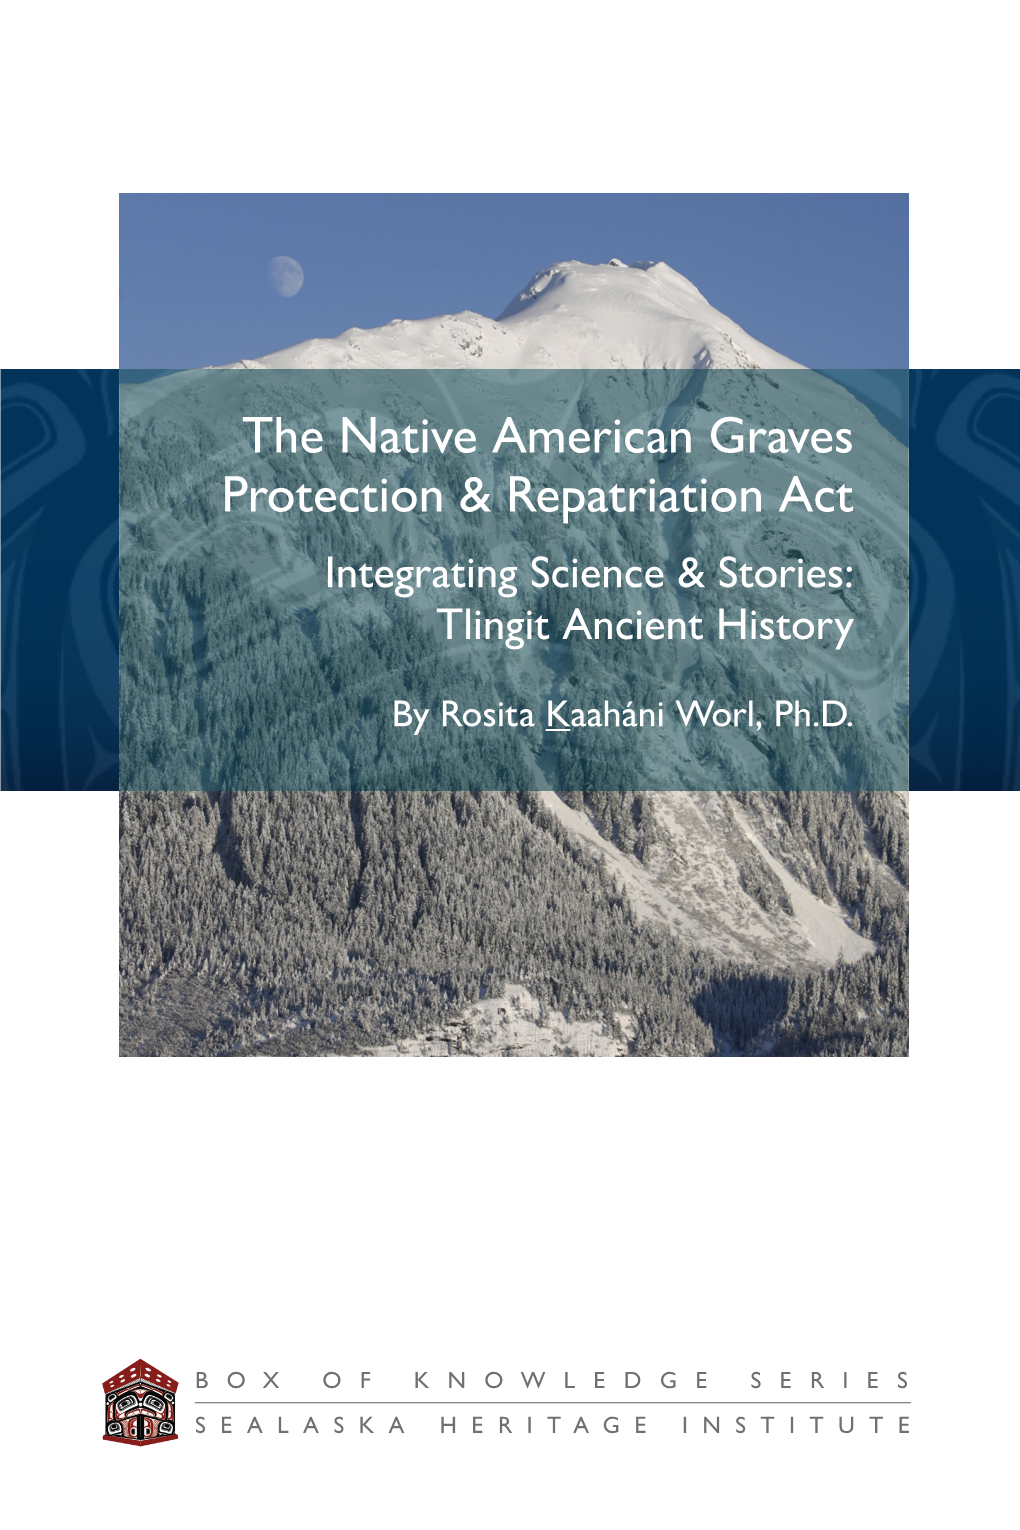 The Native American Graves Protection & Repatriation